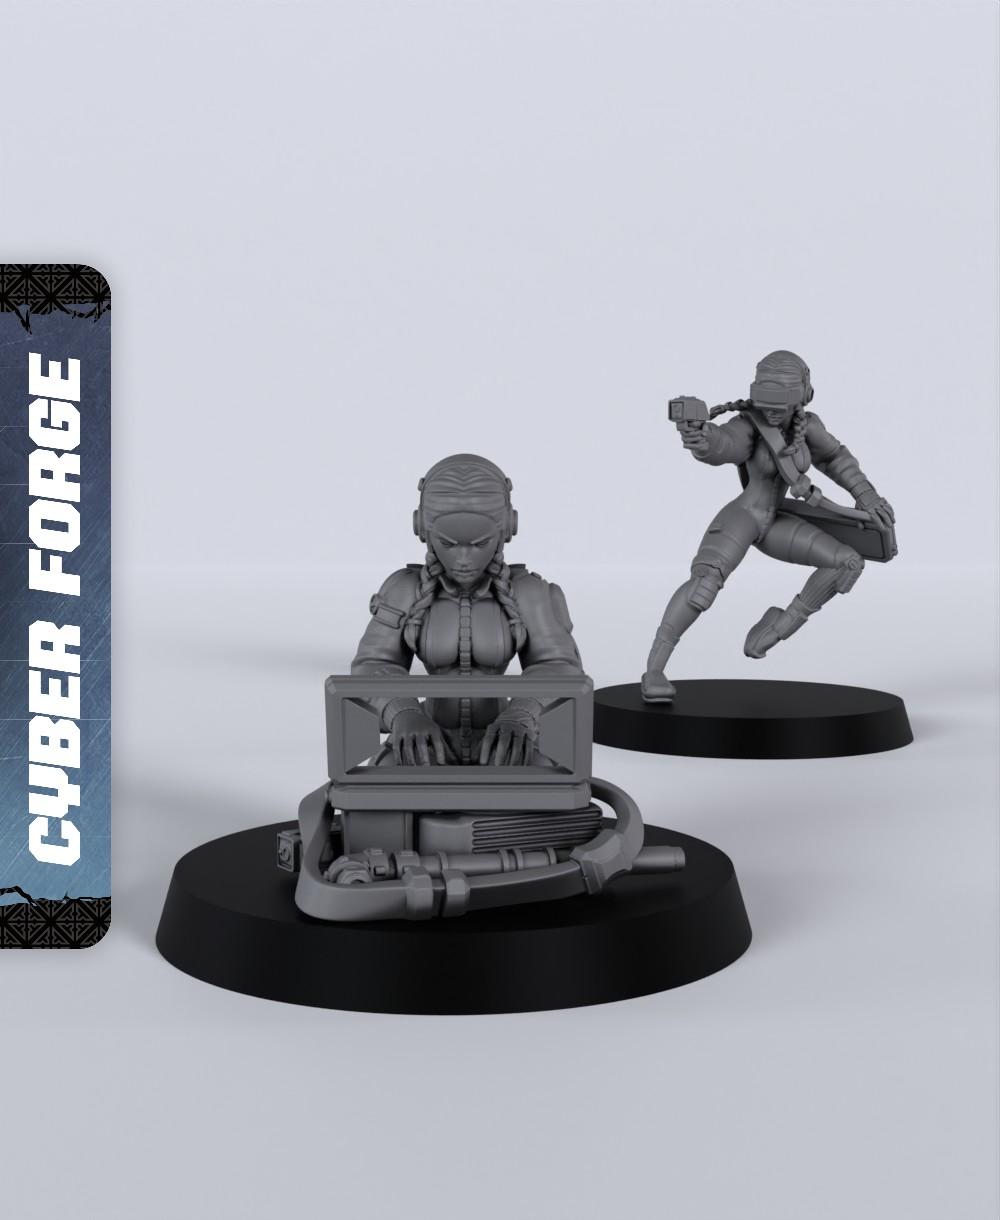 Cynthia the Hacker - With Free Cyberpunk Warhammer - 40k Sci-Fi Gift Ideas for RPG and Wargamers 3d model